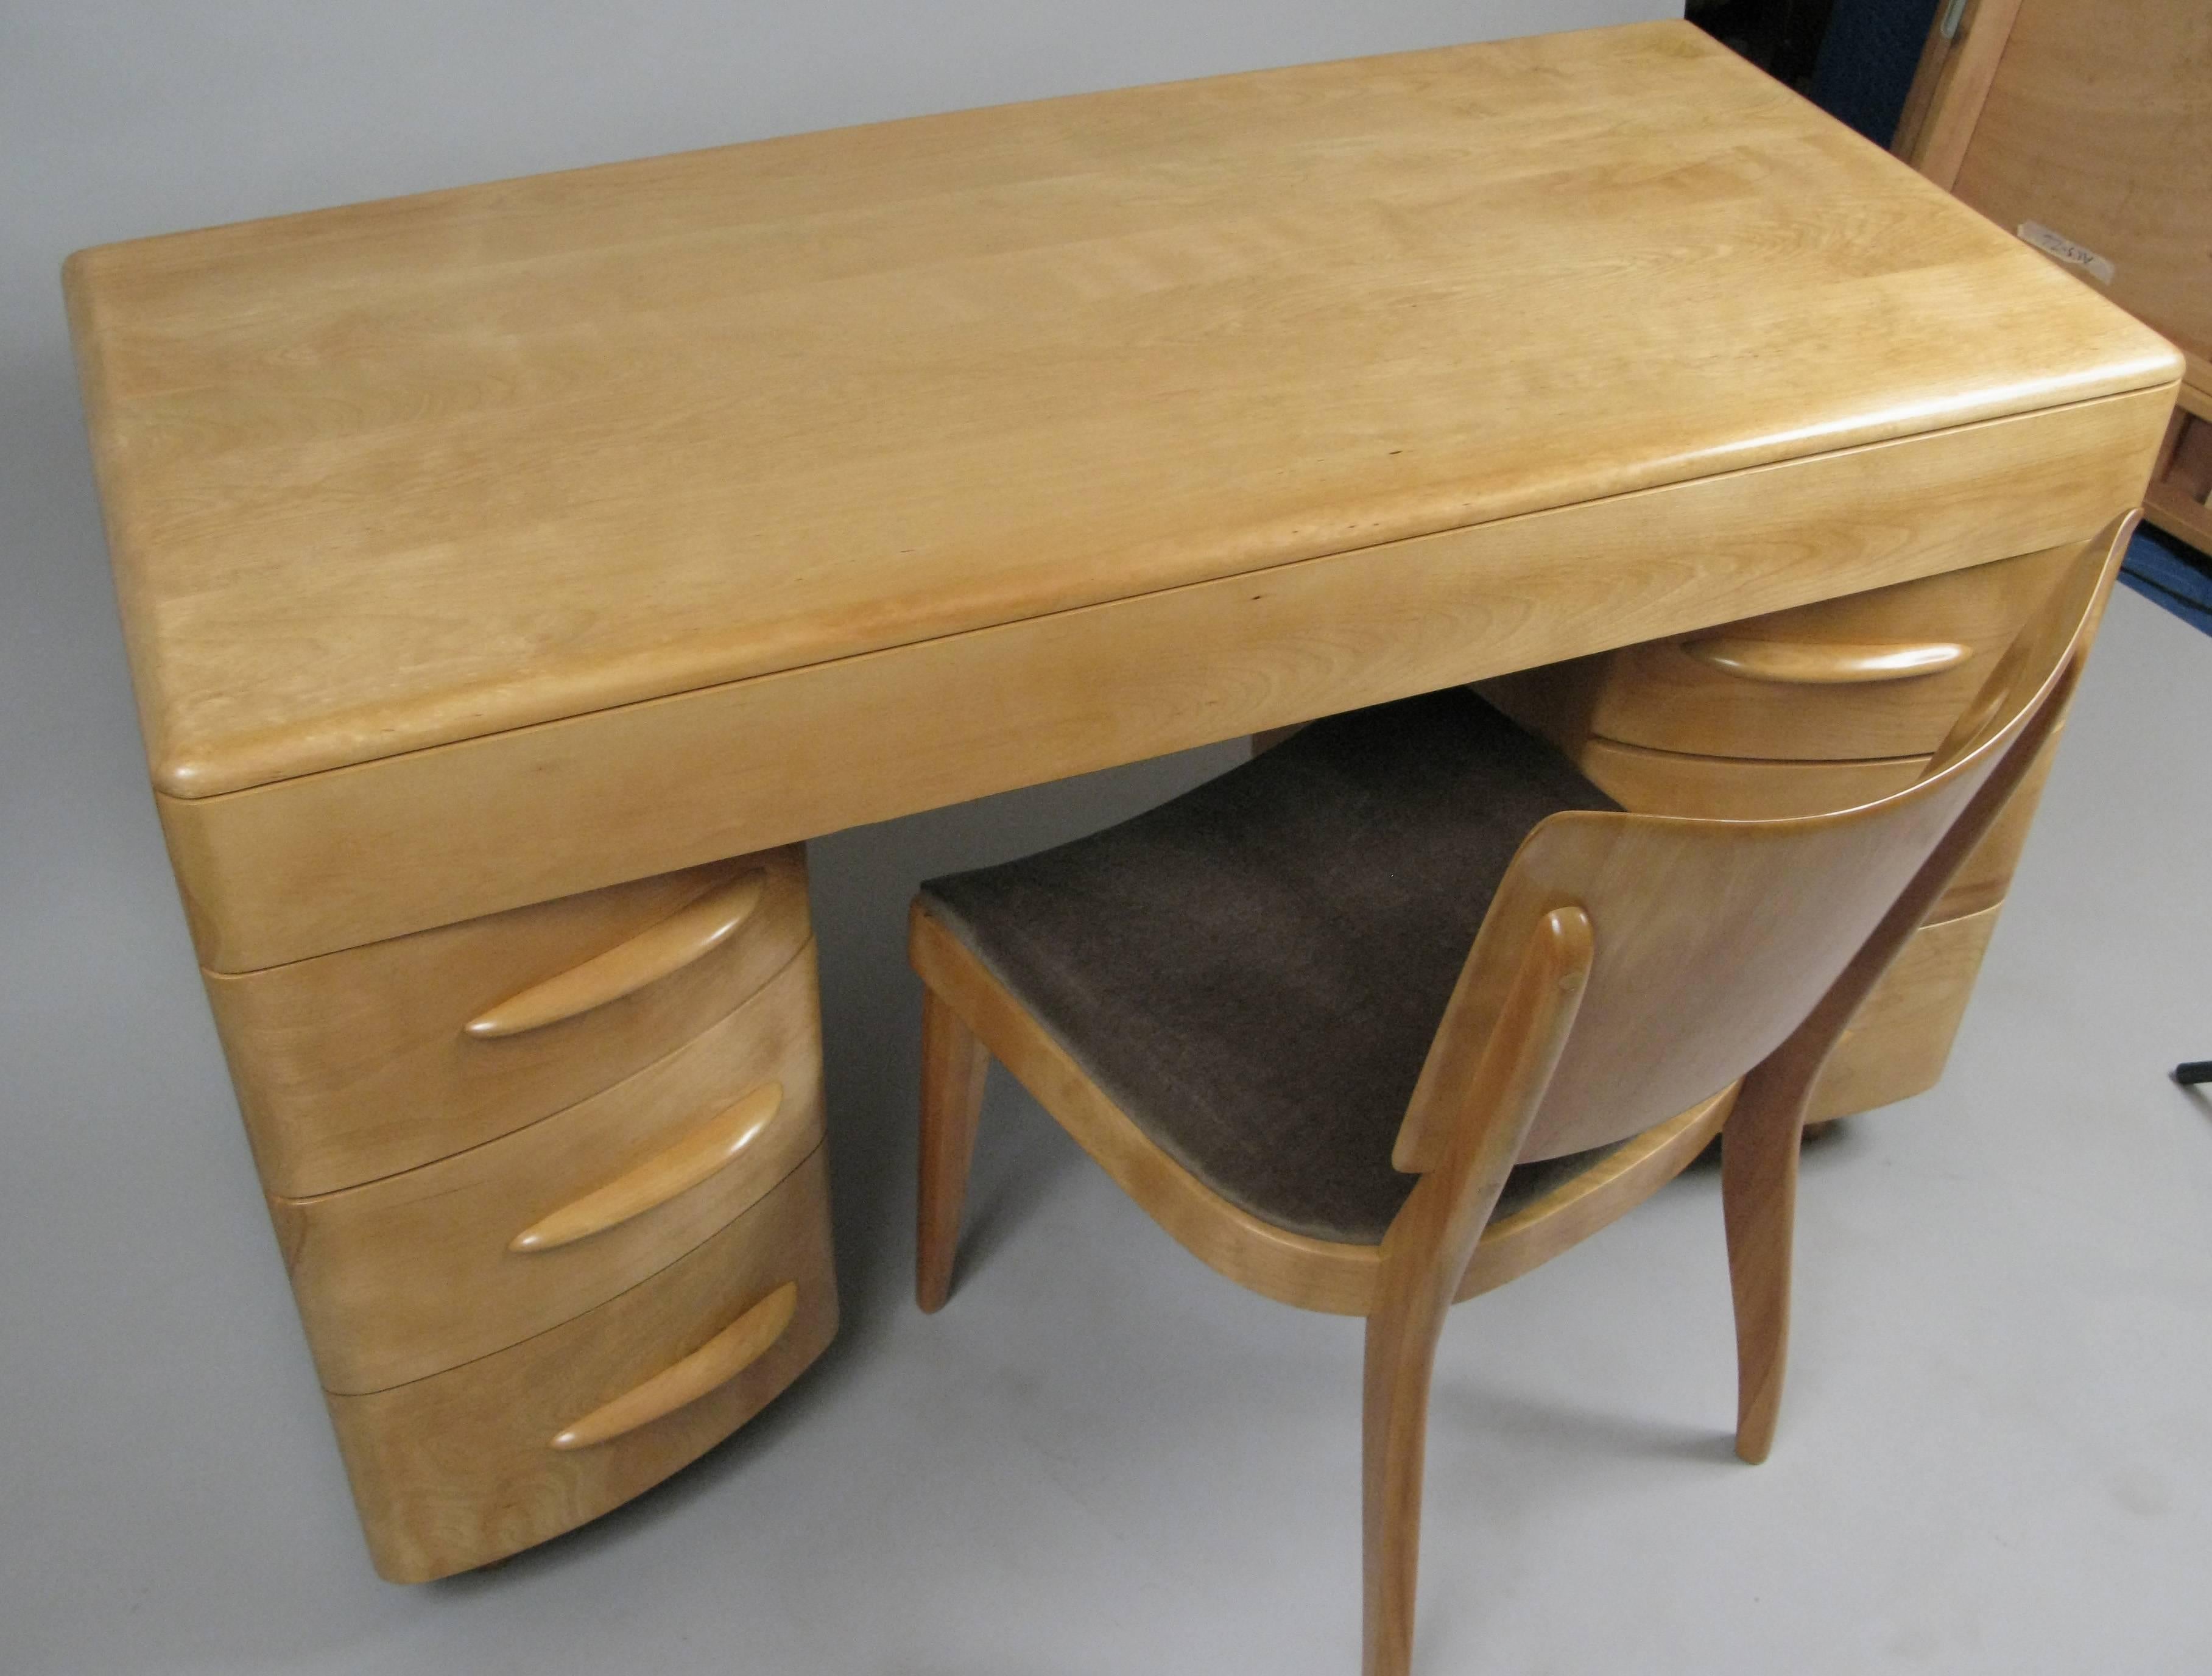 A Classic kneehole desk in solid birch made in the 1950s by Heywood Wakefield, along with a companion 'sharkfin' desk chair also by HW. The desk has a full width pencil drawer across the top and drawers on both sides. Both the desk and chair have